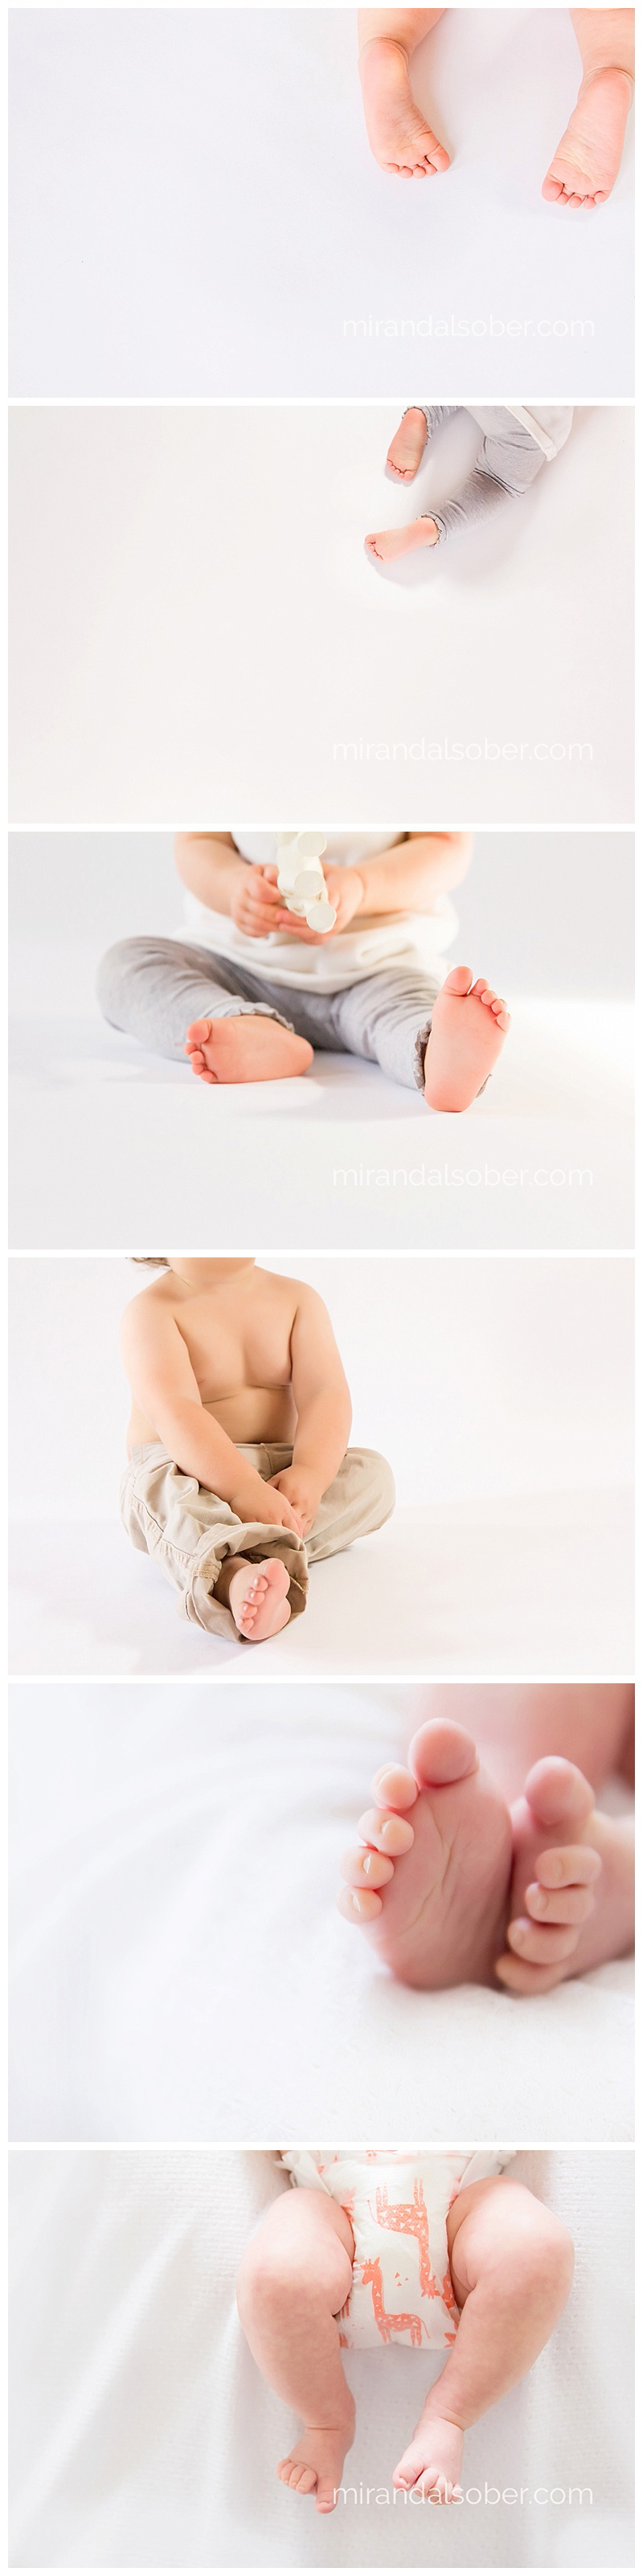 baby pictures of baby toes, Miranda L. Sober Photography